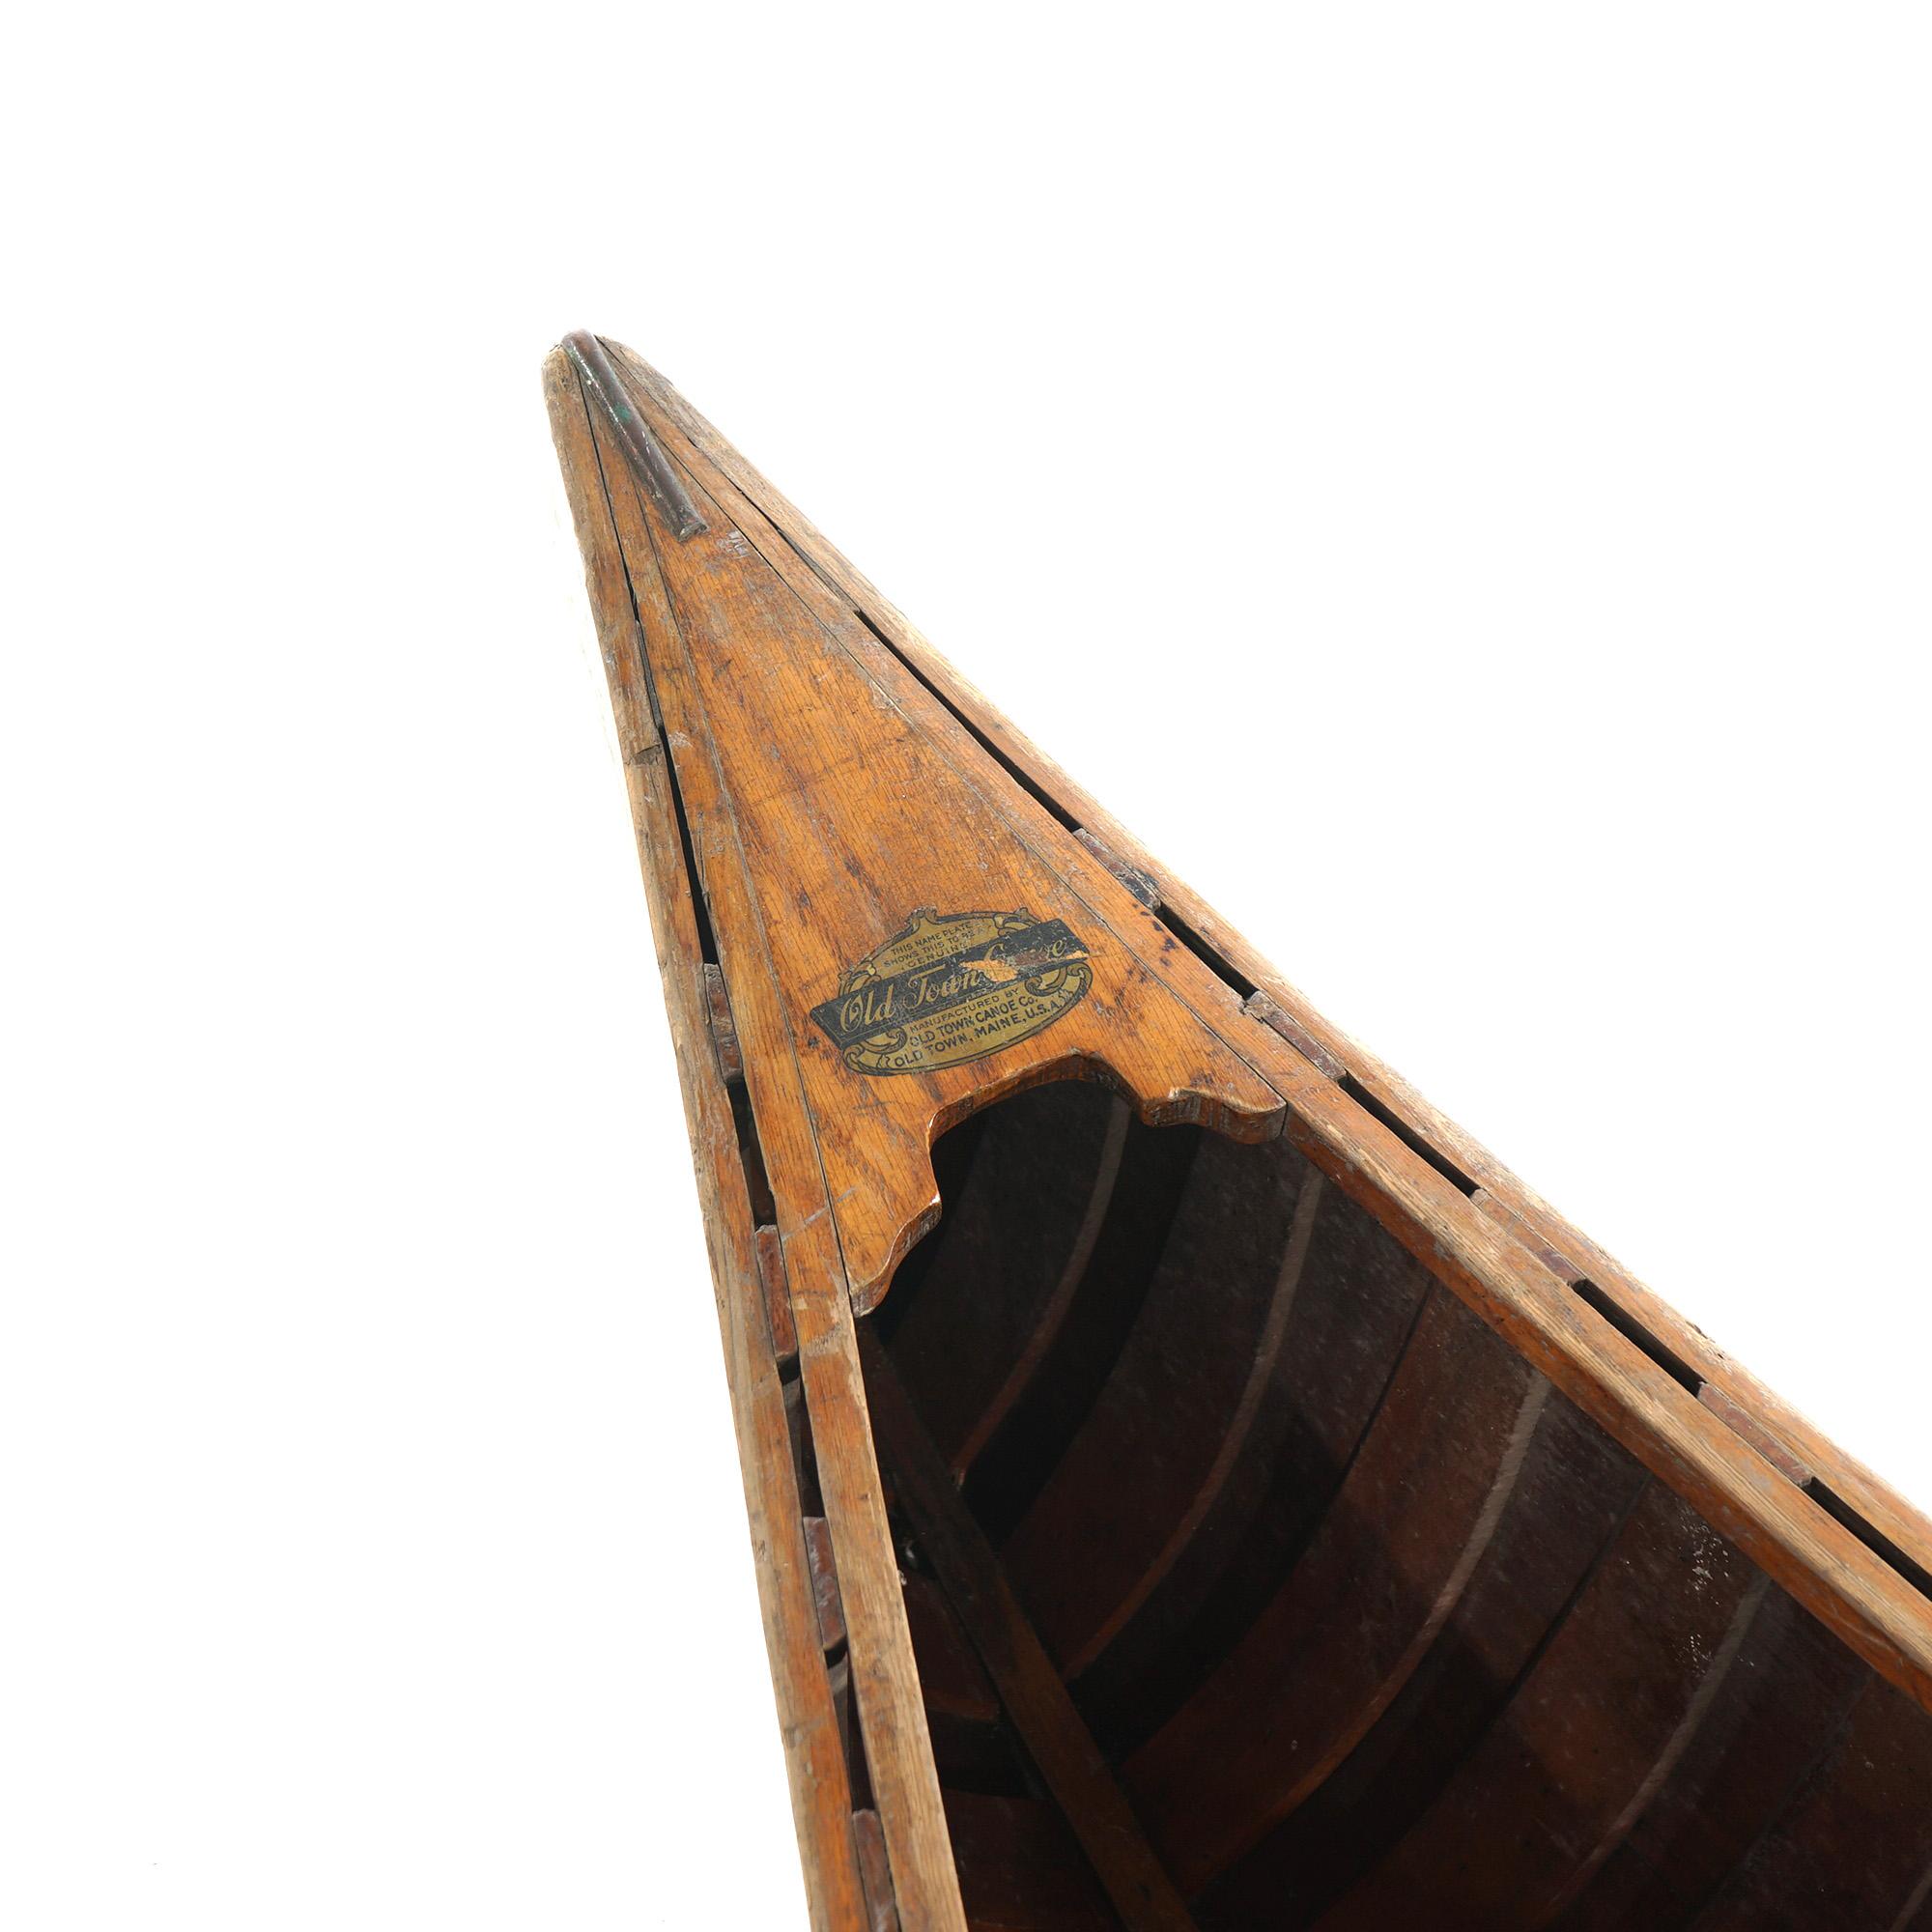 Wood Antique Old Town Hickory School Adirondack Canoe & Paddles C1930 For Sale